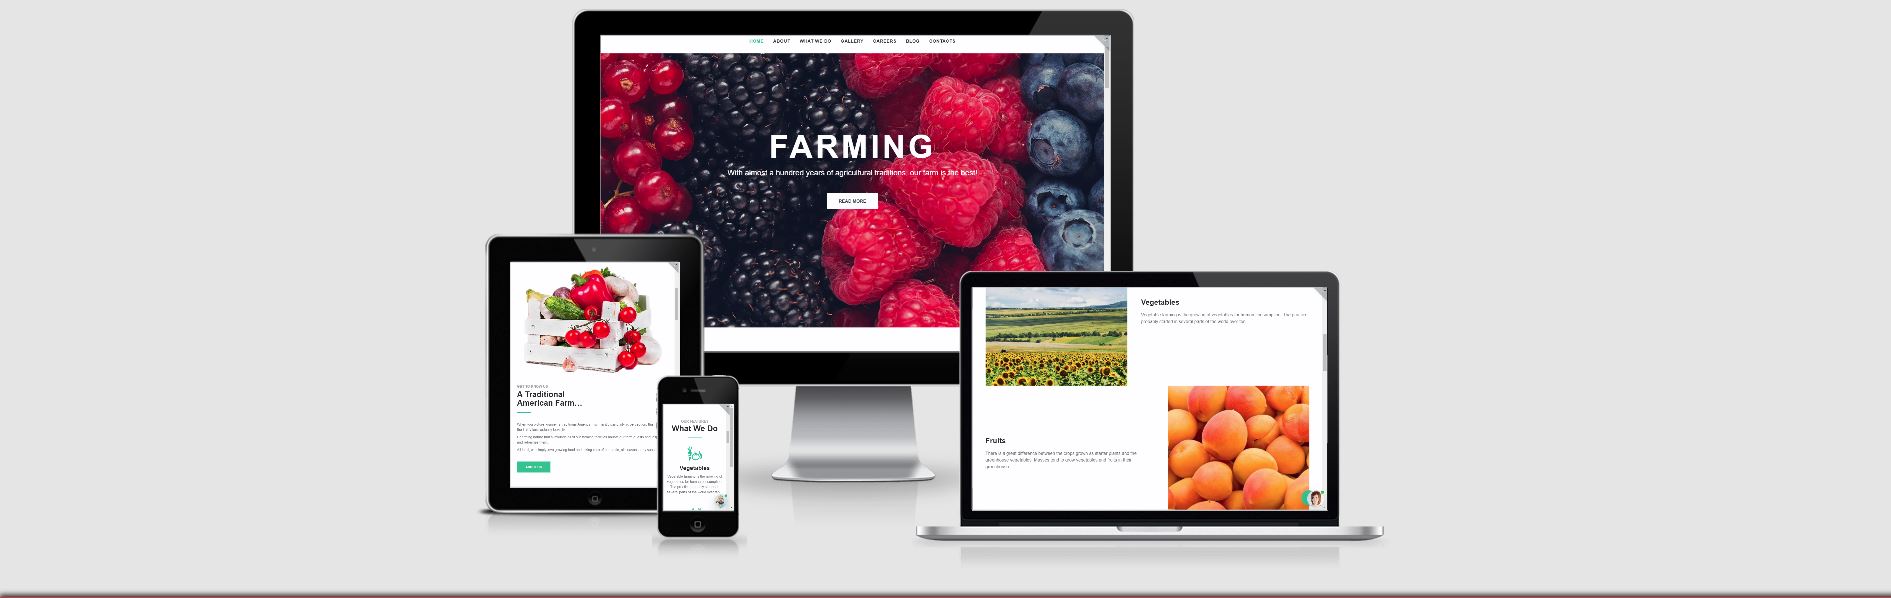 Farm products site example